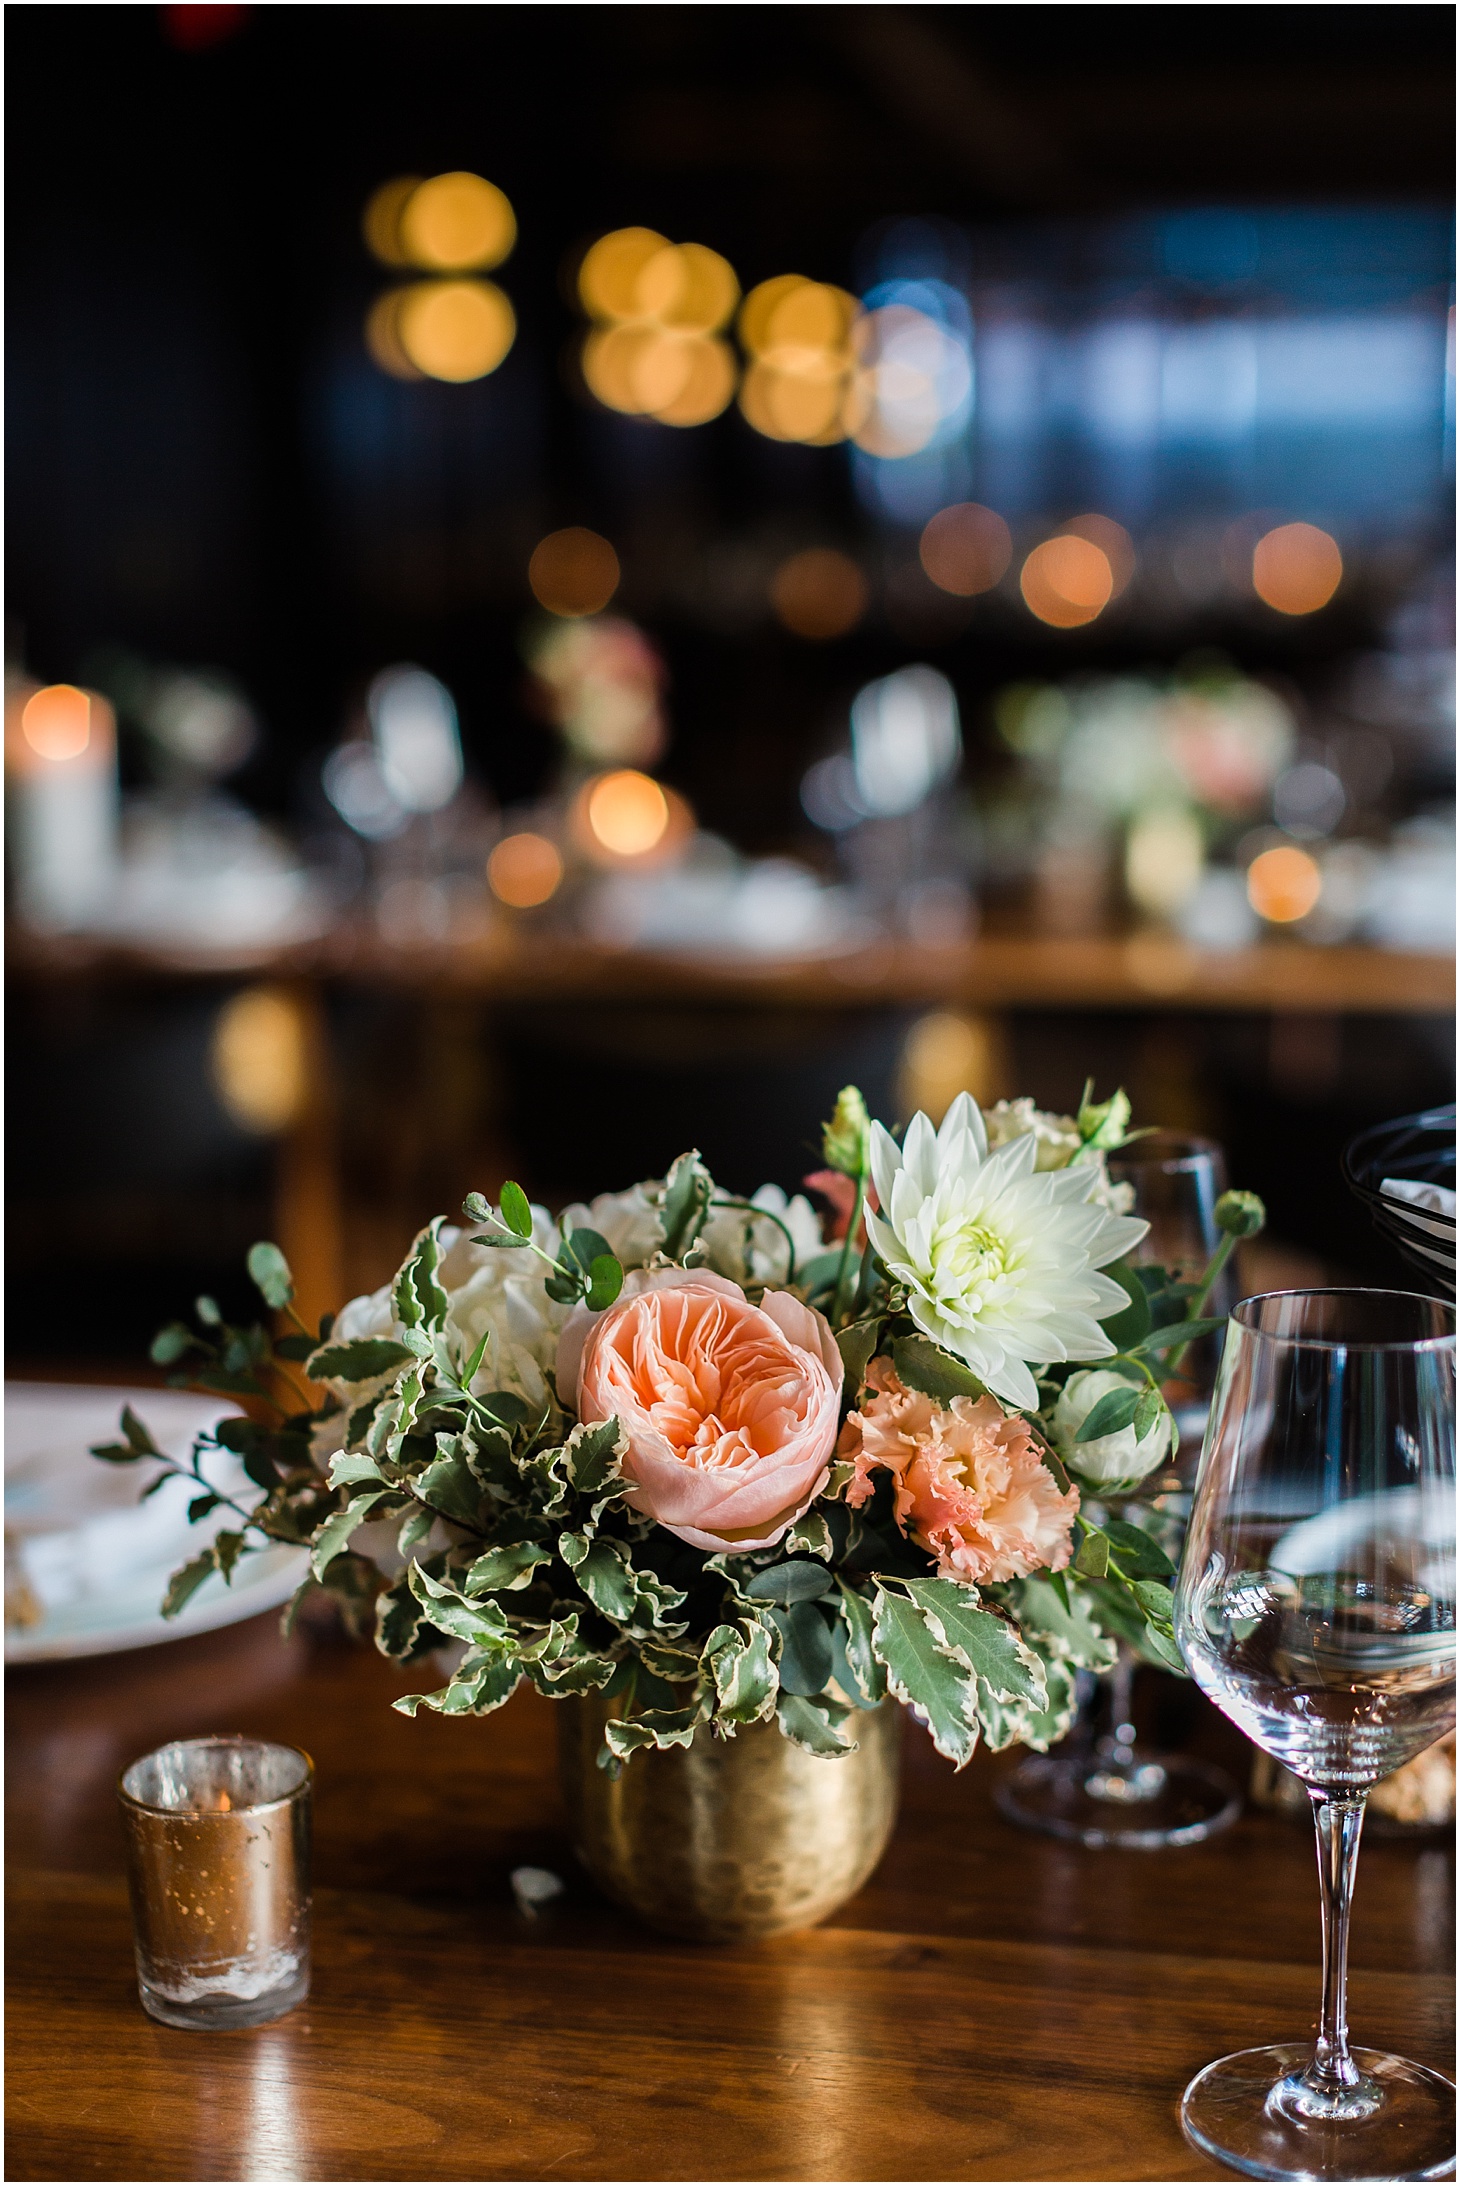 Wedding Reception at District Winery | Love Blooms Flowers | Chic and Modern Interfaith Wedding in Washington, DC | Sarah Bradshaw Photography